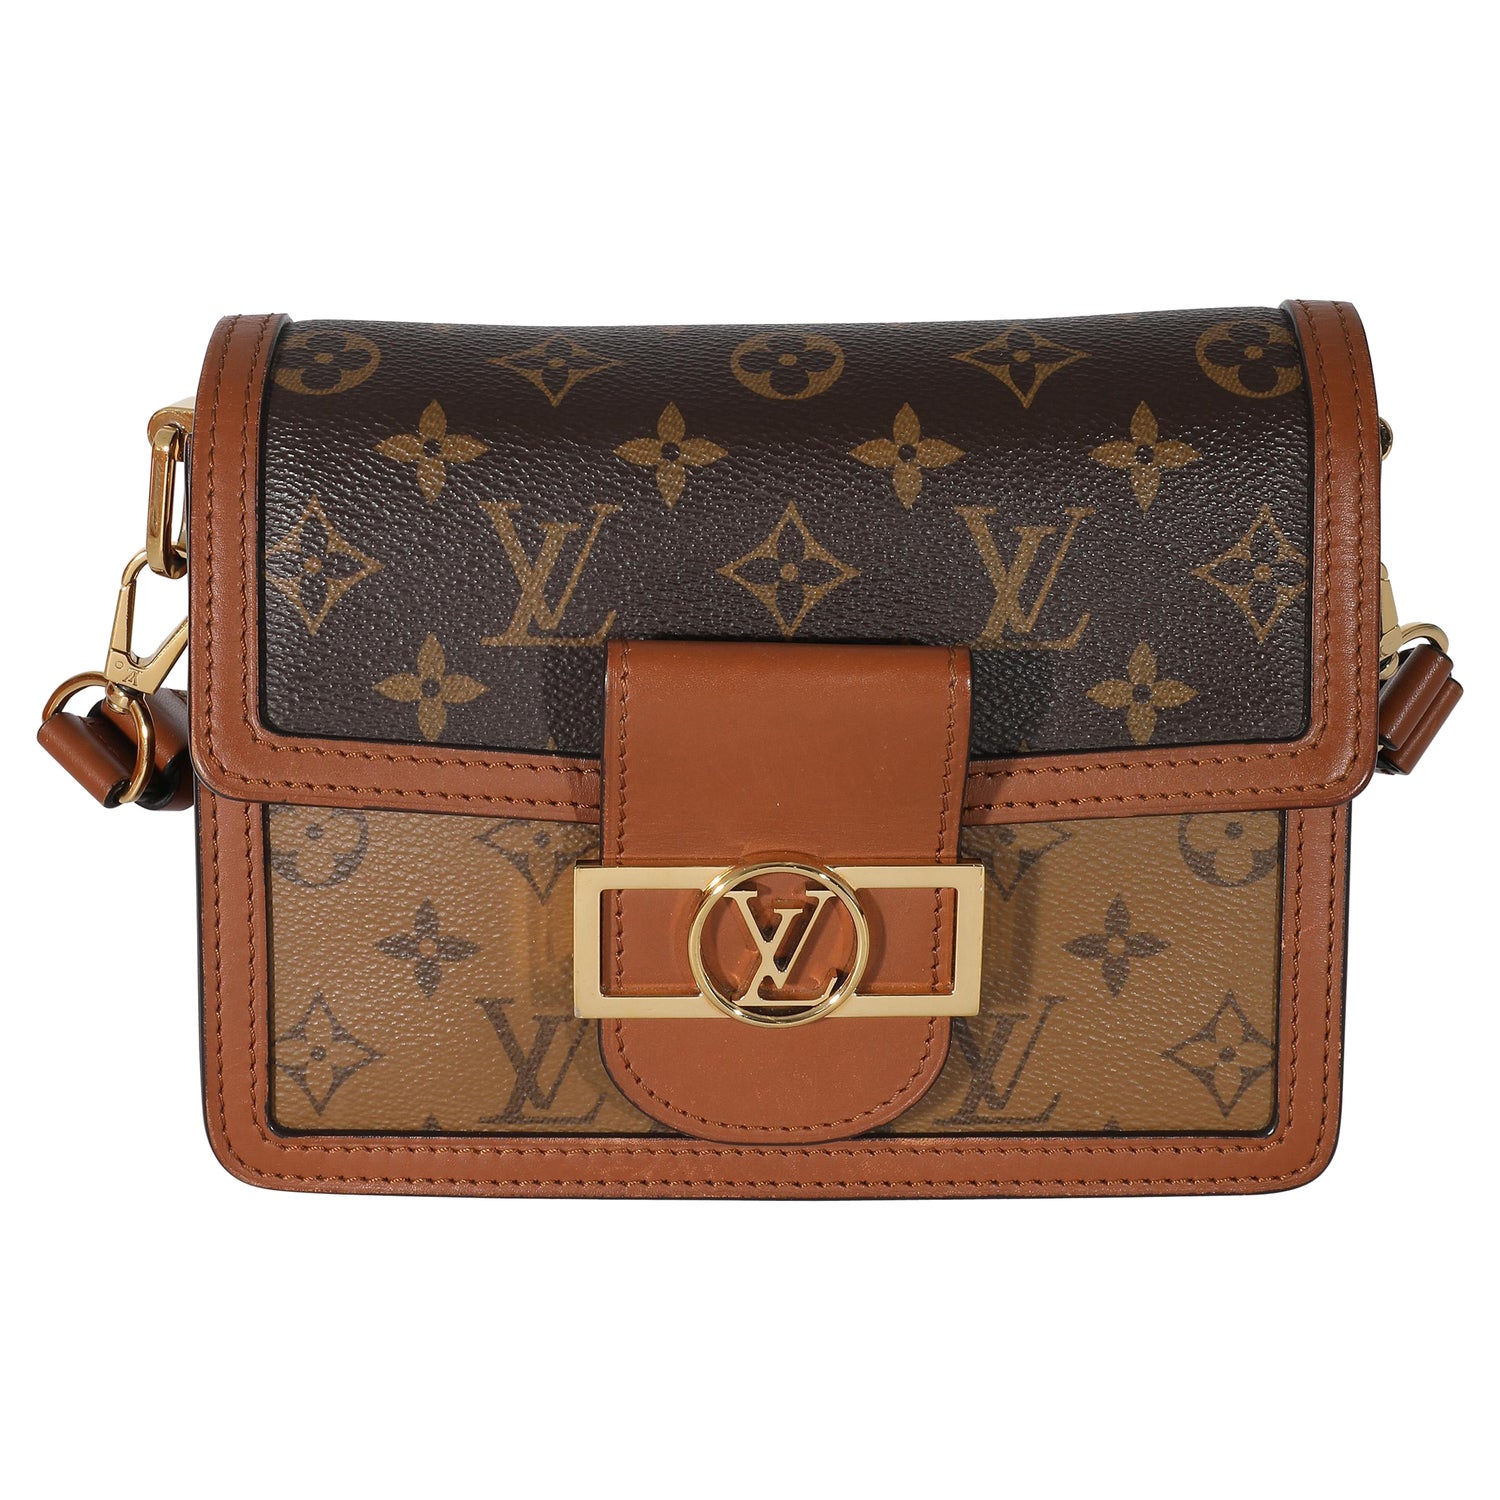 Lv Dauphine - 2 For Sale on 1stDibs  lv dauphine black, dauphine leather  meaning, dauphine lv